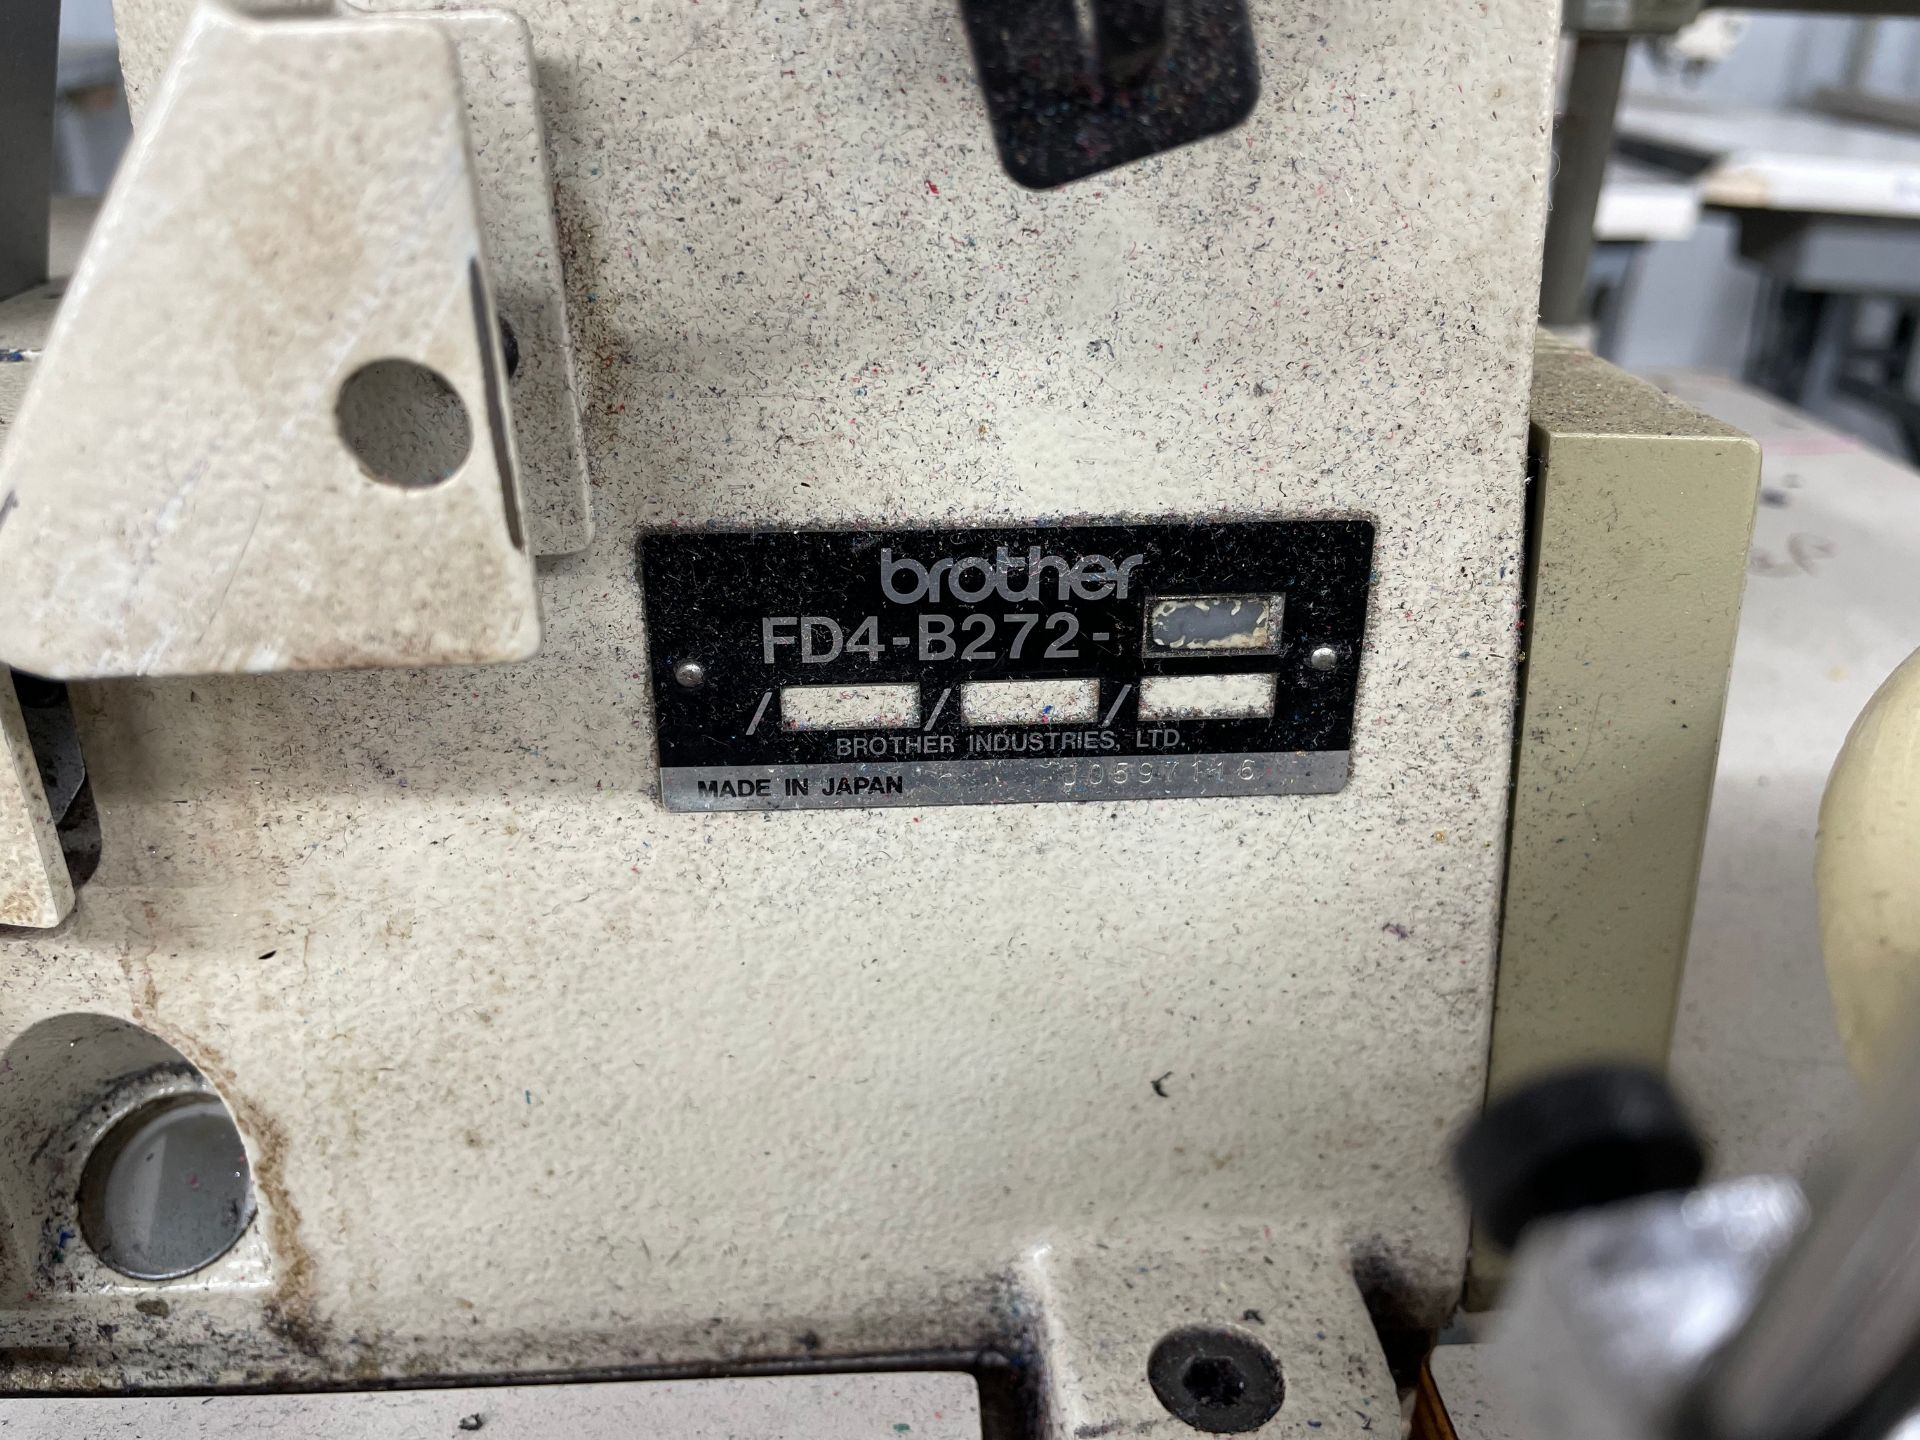 Brother Coverstitch Sewing Machine with Table - Image 6 of 9